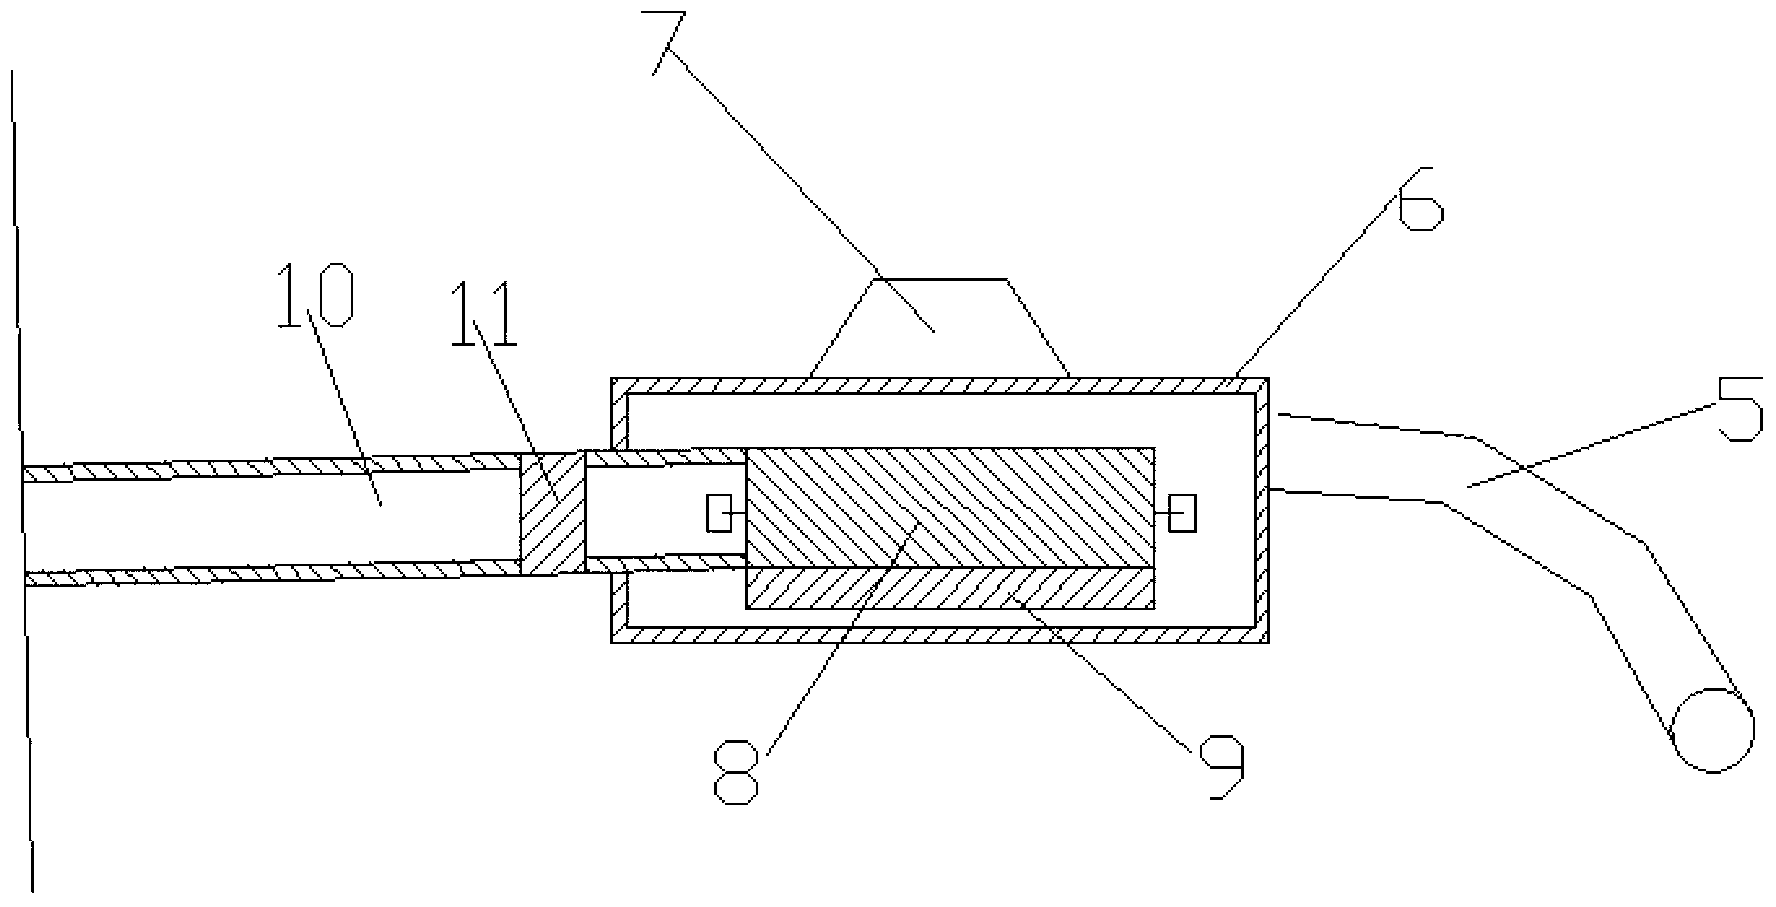 Blending and opening device